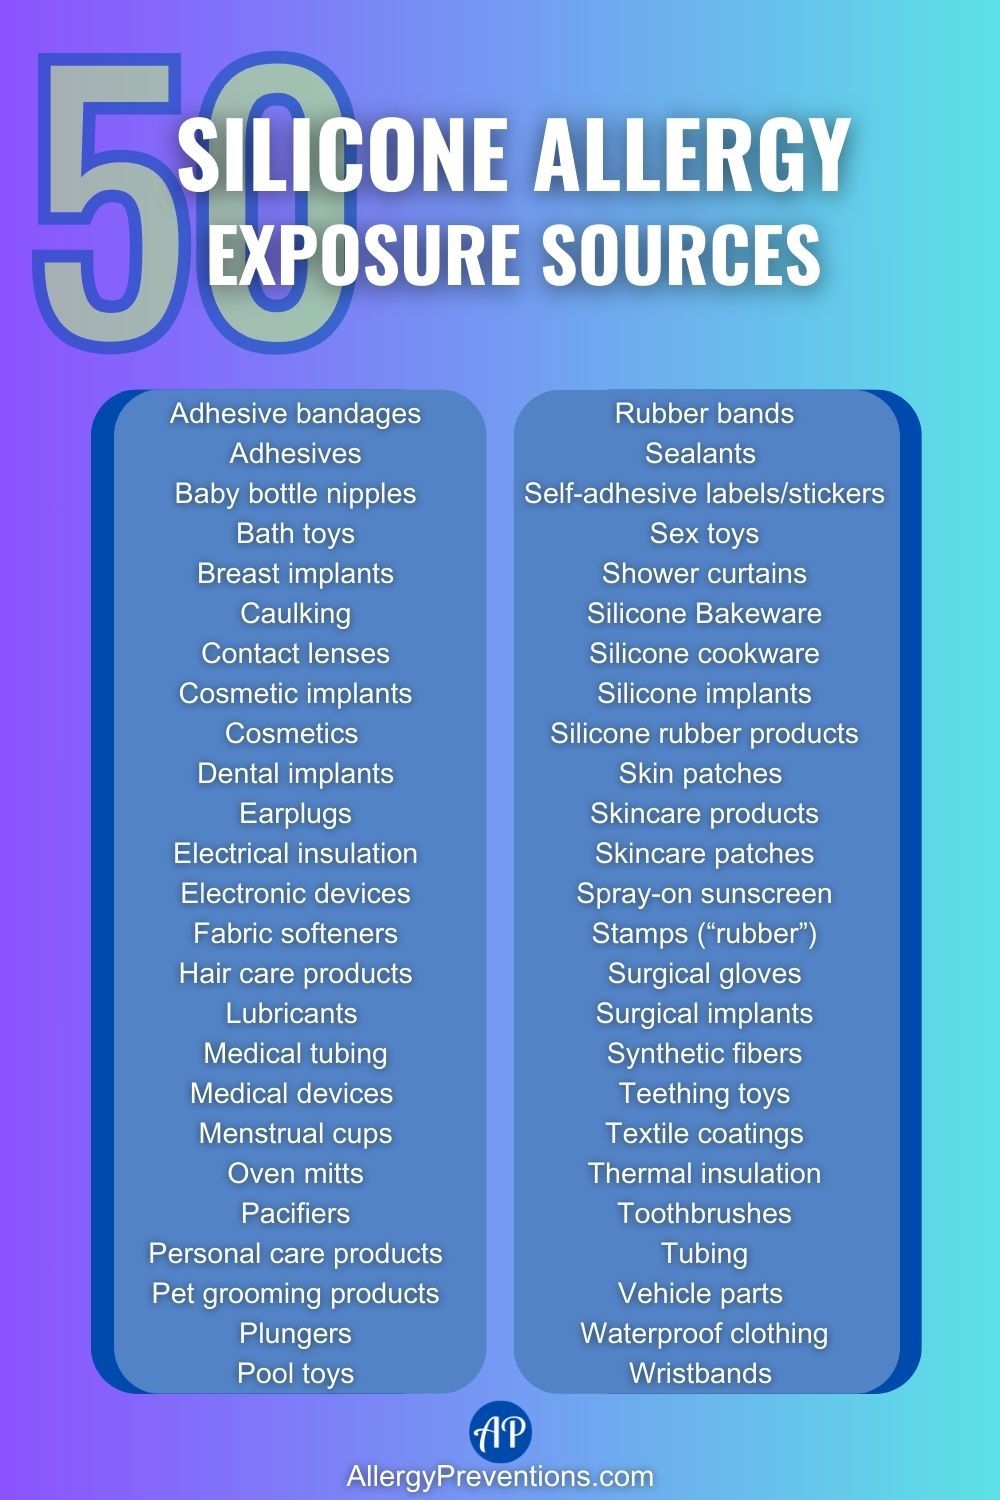 Silicone Allergy Exposure Sources Infographic. Here are fifty possible areas you may be exposed to silicone products: Adhesive bandages, Adhesives, Baby bottle nipples, Bath toys, Breast implants, Caulking, Contact lenses, Cosmetic implants, Cosmetics , Dental implants, Earplugs, Electrical insulation, Electronic devices, Fabric softeners, Hair care products, Lubricants , Medical tubing, Medical devices , Menstrual cups, Oven mitts, Pacifiers, Personal care products, Pet grooming products, Plungers, Pool toys, Rubber bands, Sealants , Self-adhesive labels/stickers, Sex toys, Shower curtains, Silicone Bakeware, Silicone cookware, Silicone implants, Silicone rubber products, Skin patches , Skincare products, Skincare patches, Spray-on sunscreen, Stamps (“rubber”), Surgical gloves, Surgical implants, Synthetic fibers, Teething toys, Textile coatings, Thermal insulation, Toothbrushes, Tubing, Vehicle parts, Waterproof clothing, and Wristbands.